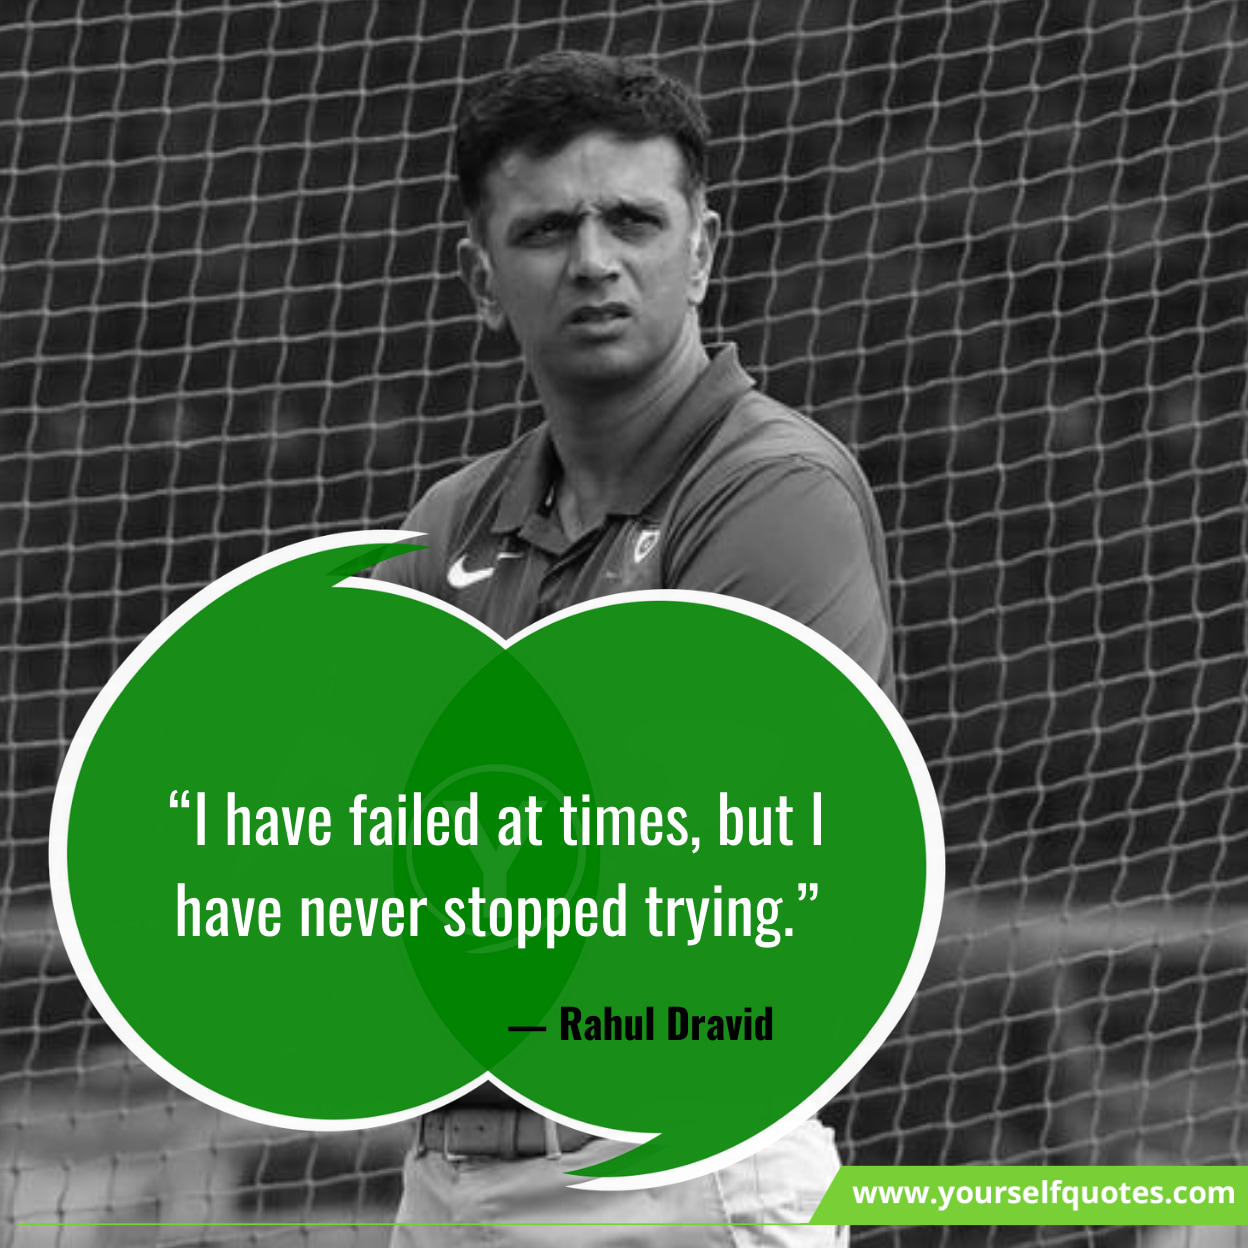 Cricket Quotes From Rahul Dravid